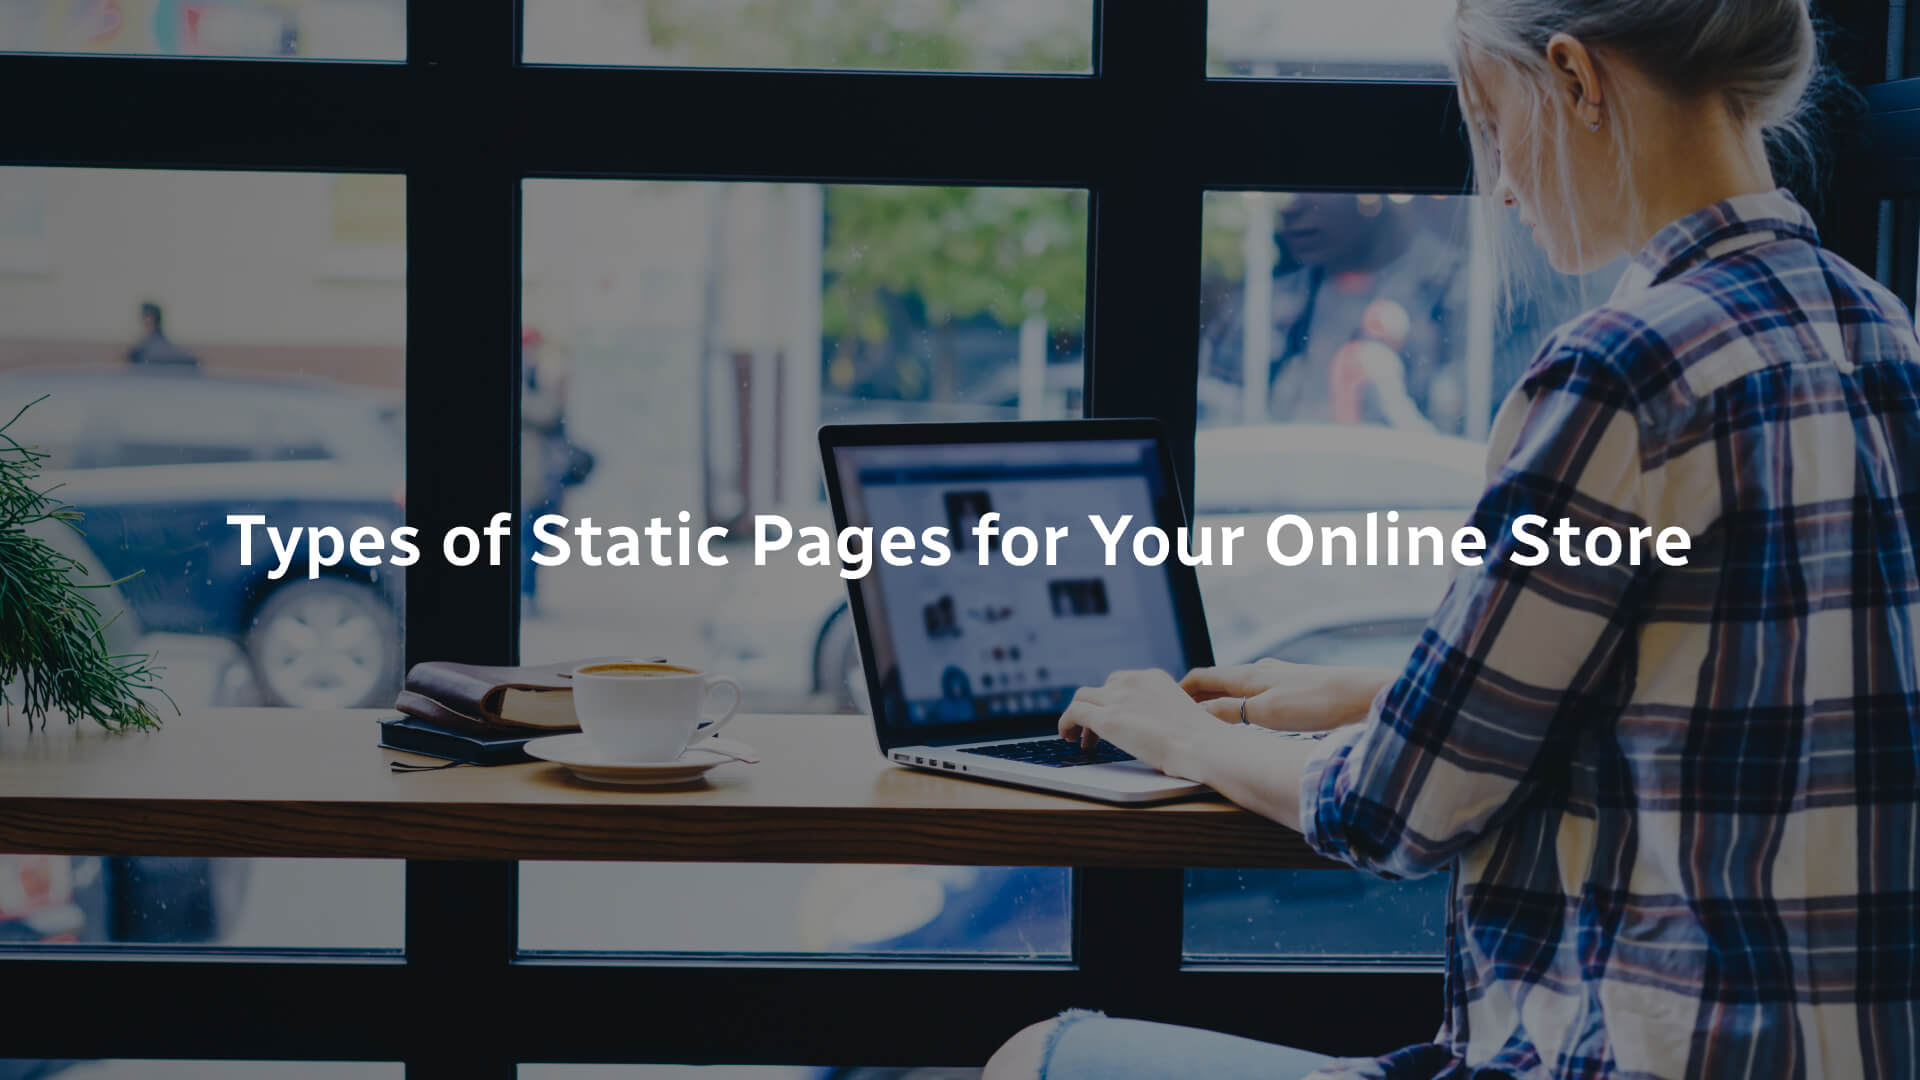 Types of Static Pages for Your Online Store